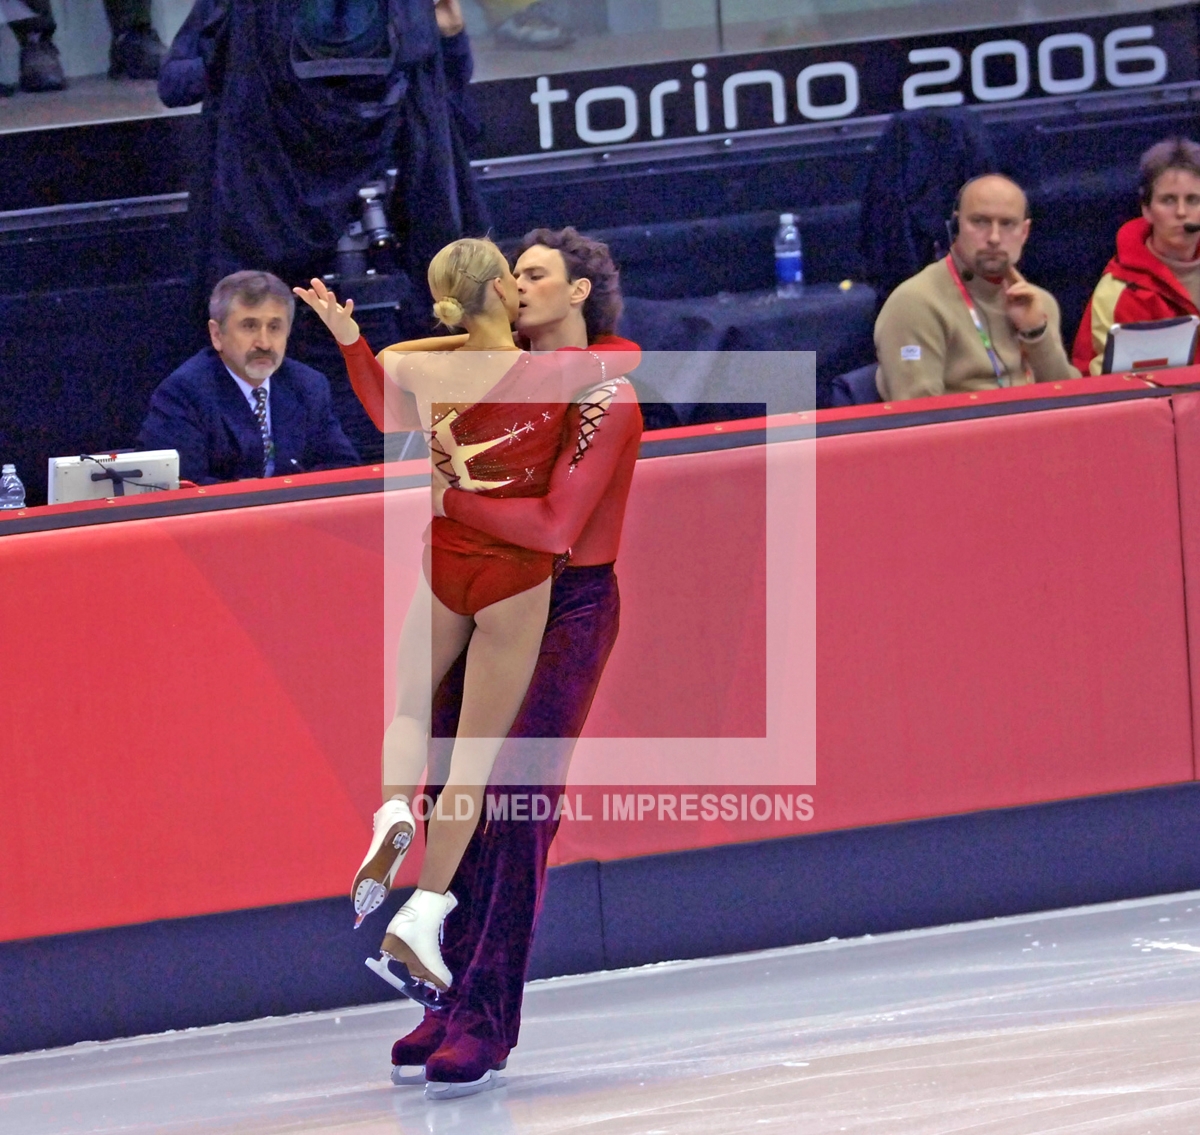 Russian Ice Skating Pairs Tastiana Totmianina and Maxim Marinin show their passion at the Free Skating Competition in Torino Italy on February 13, 2006. The Russian Pair won the Gold Medal.(AP Photo/Dick Druckman)